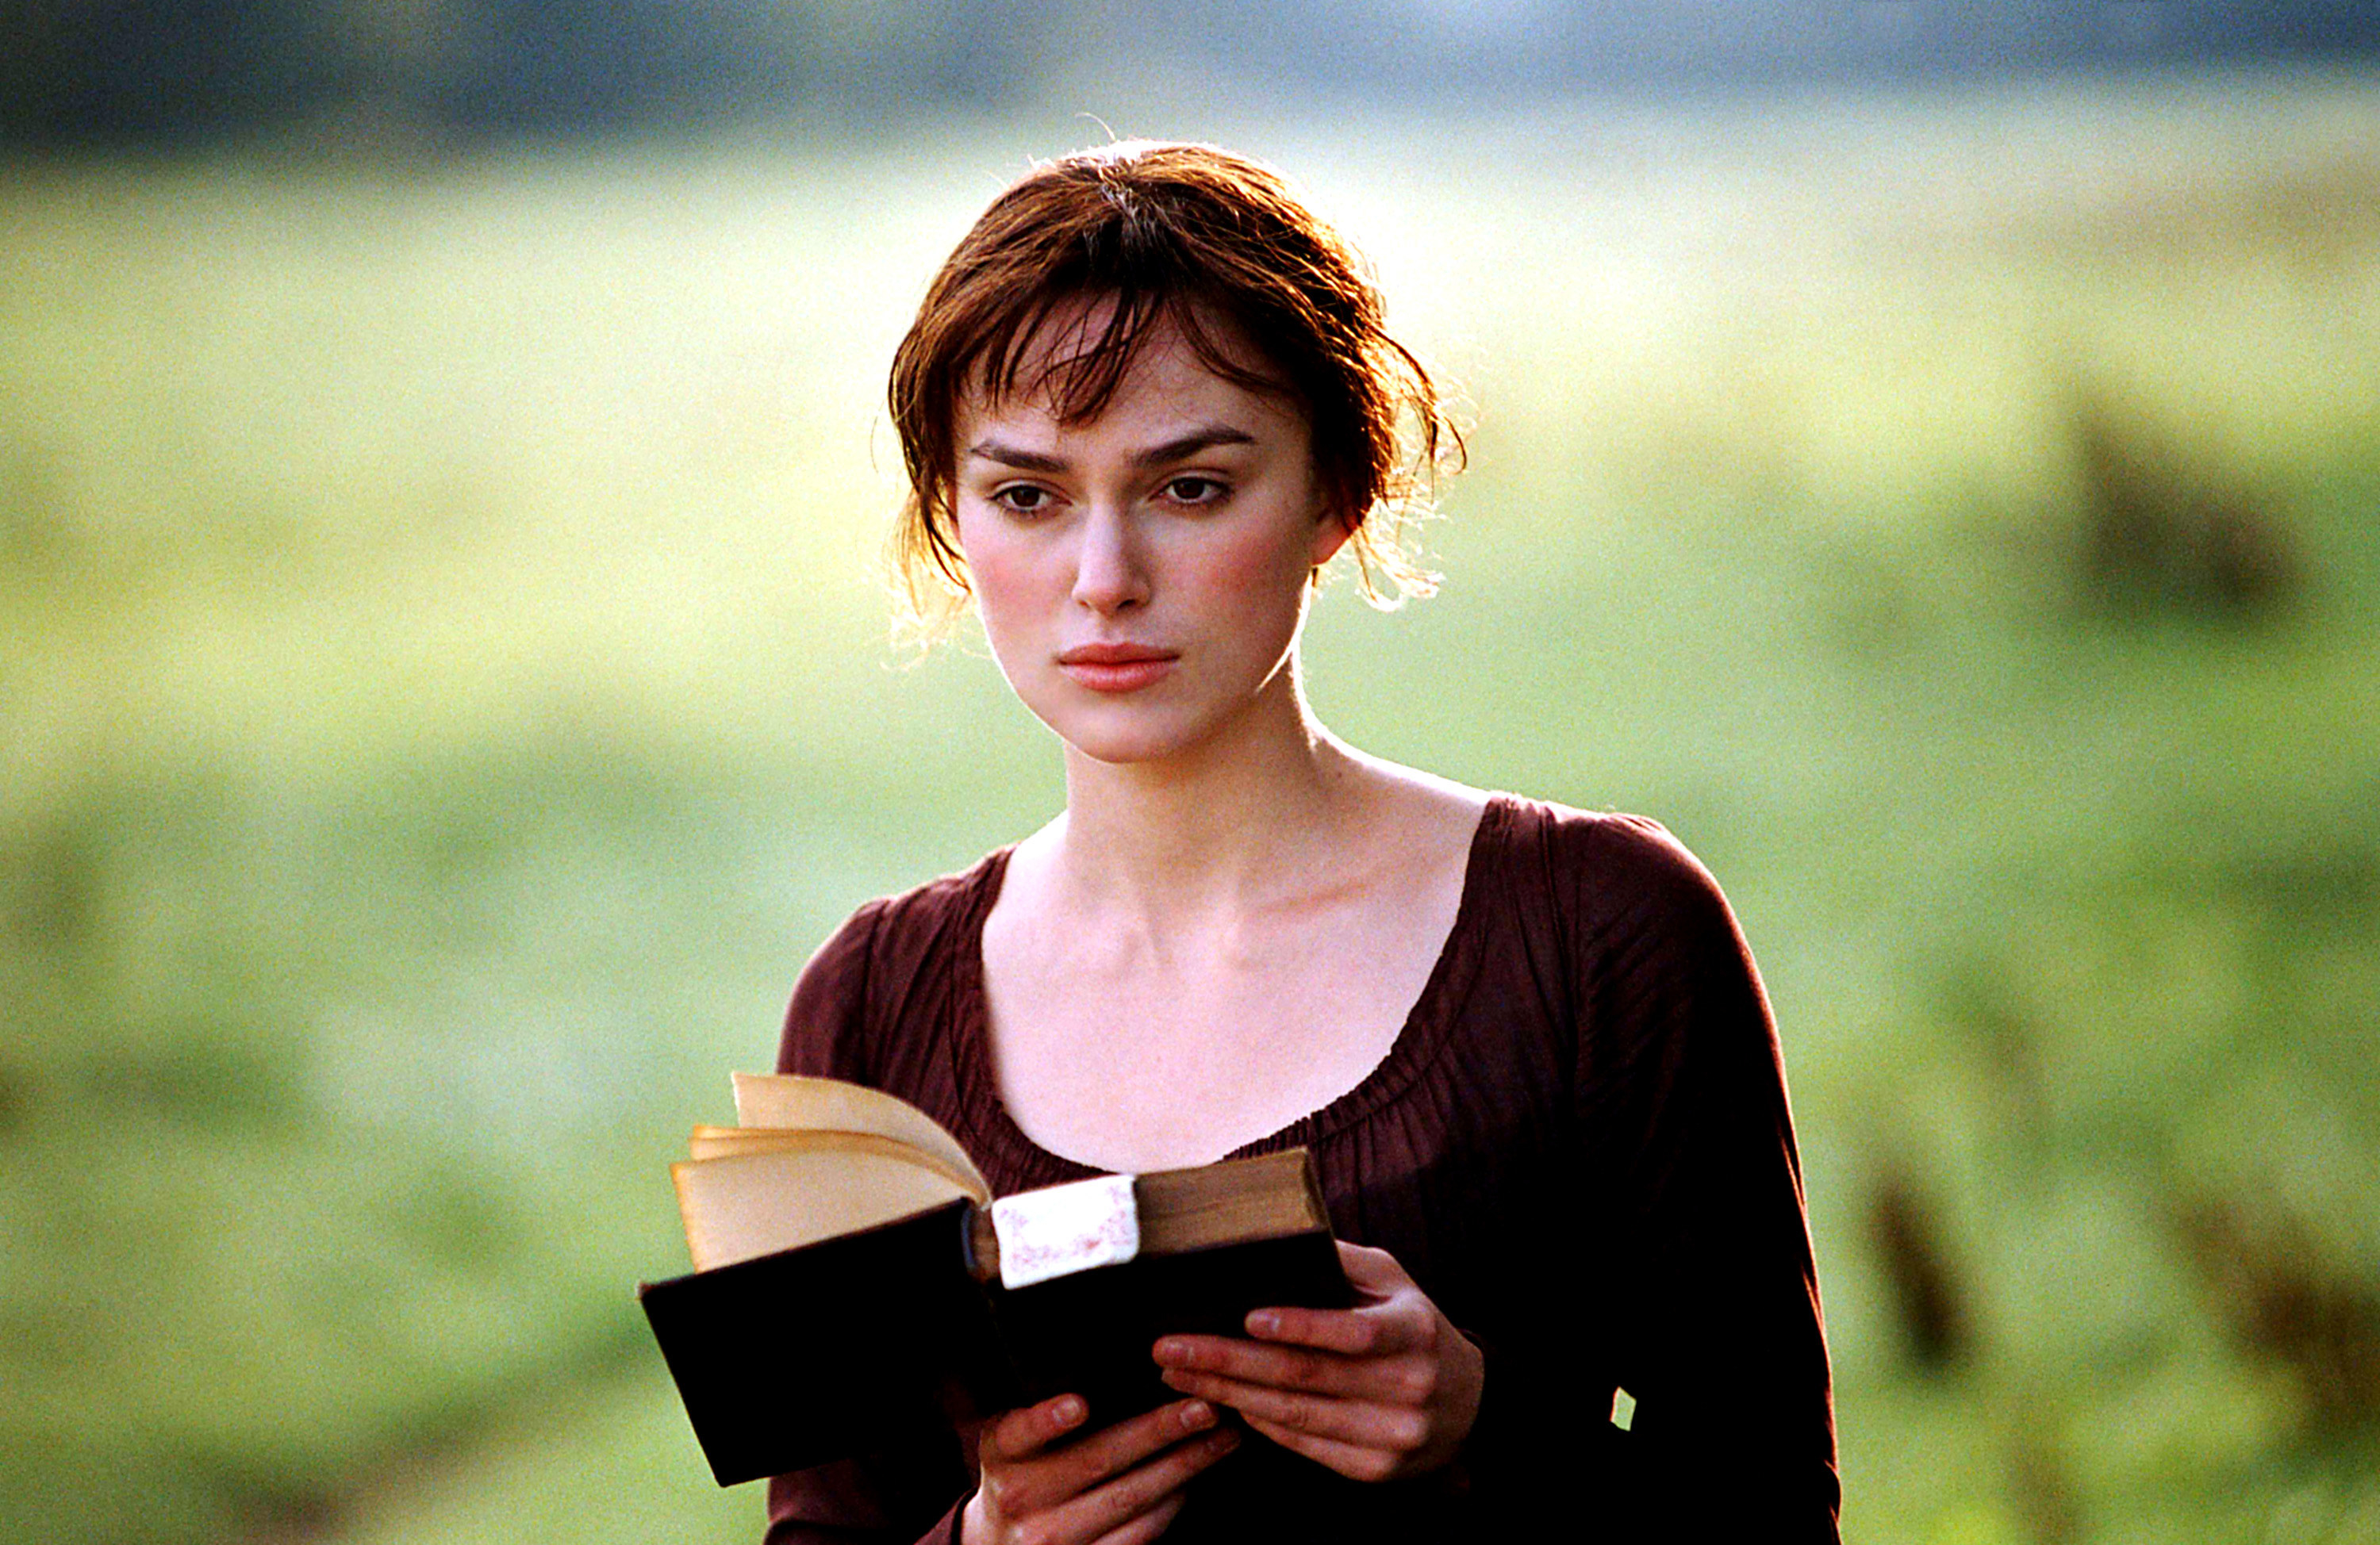 Keira Knightley with her book open